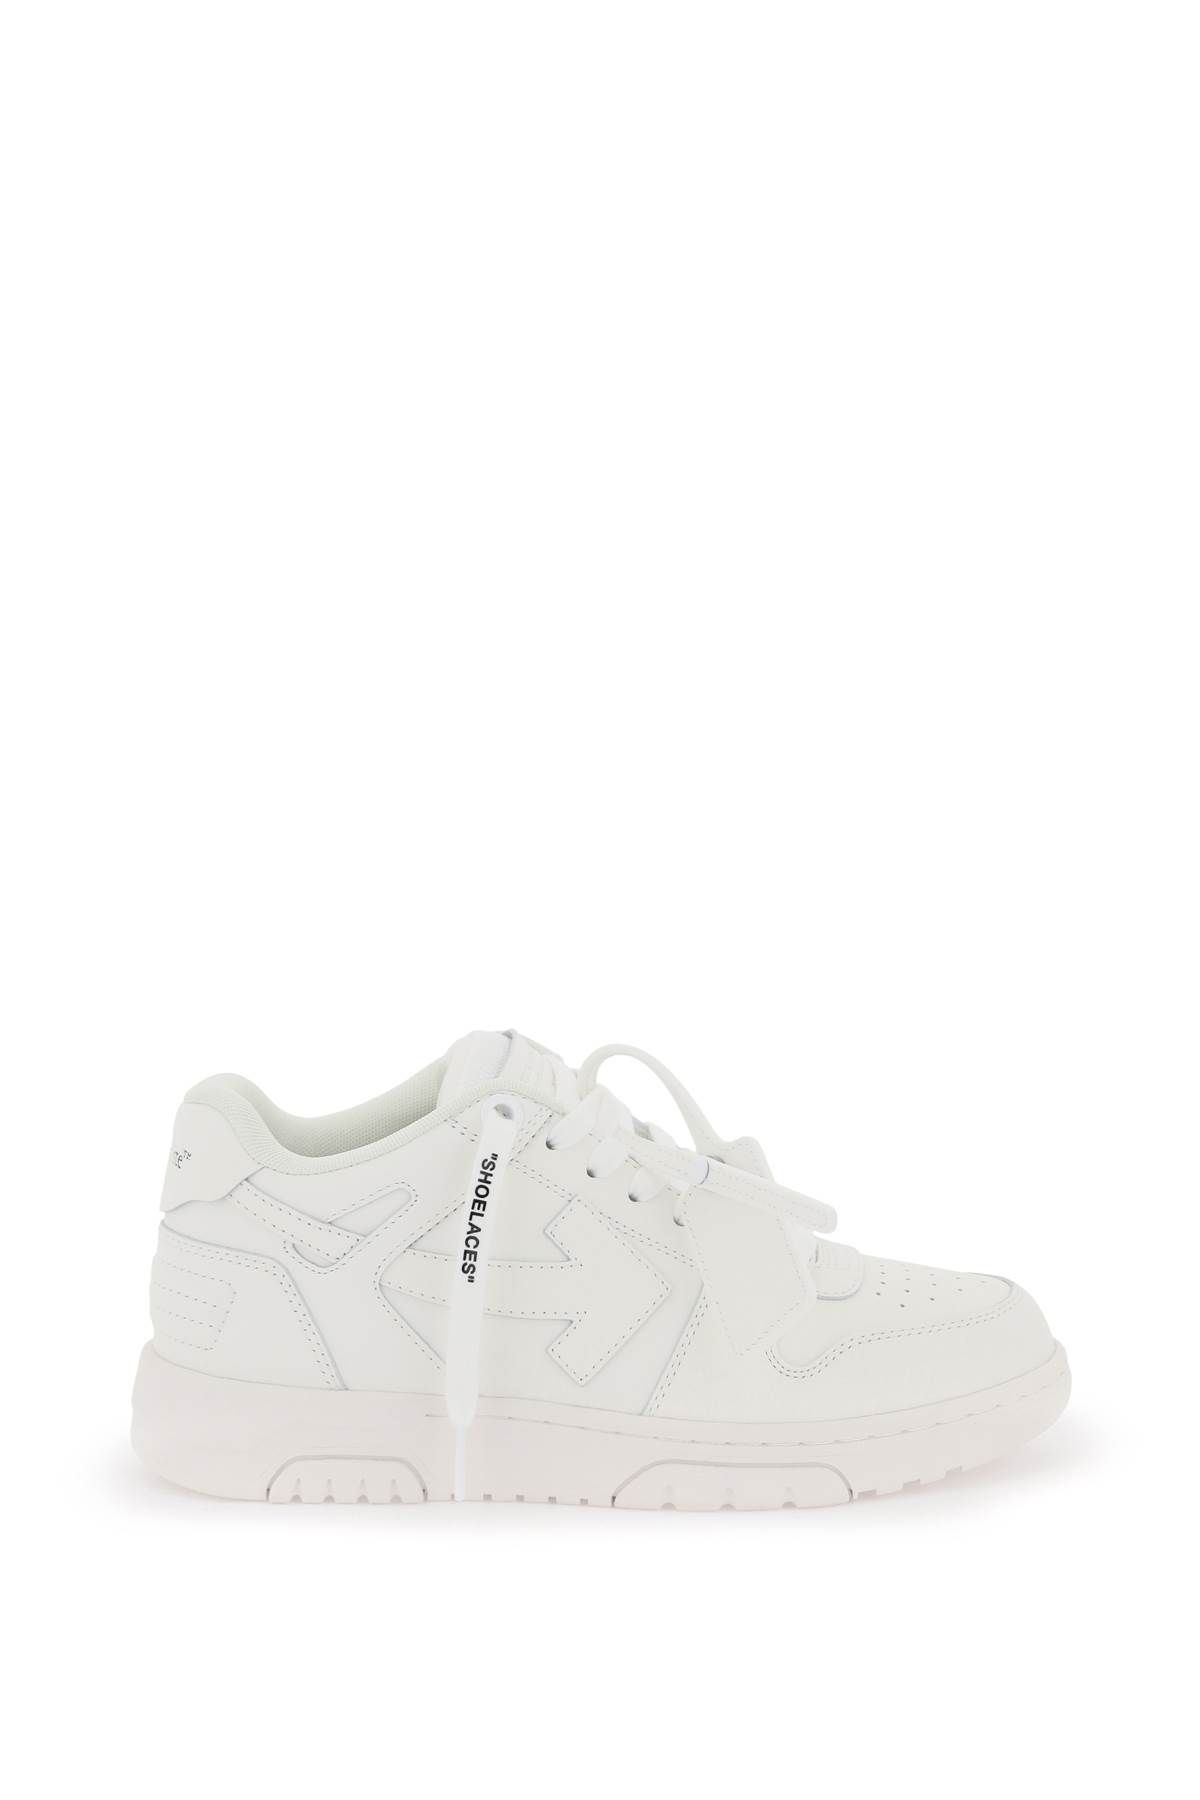 OFF-WHITE OFF-WHITE out of office sneakers